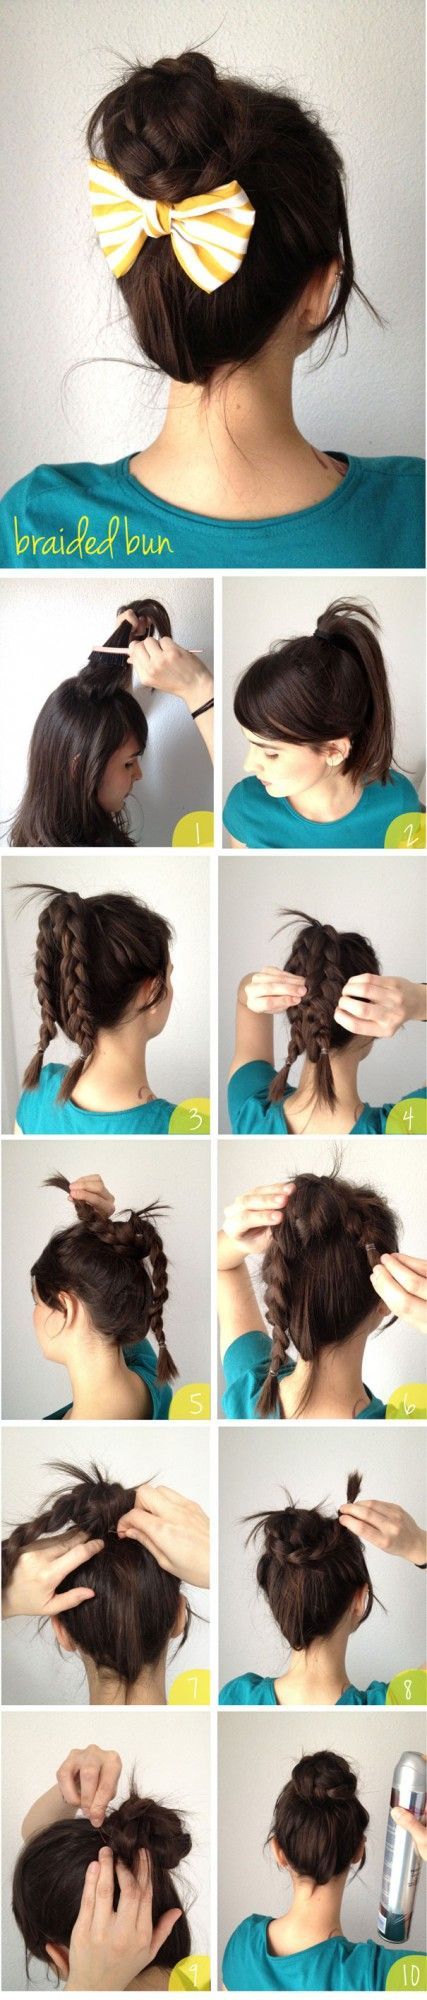 18 Cute Hairstyles that Can Be Done in a Few Minutes – Pretty Designs